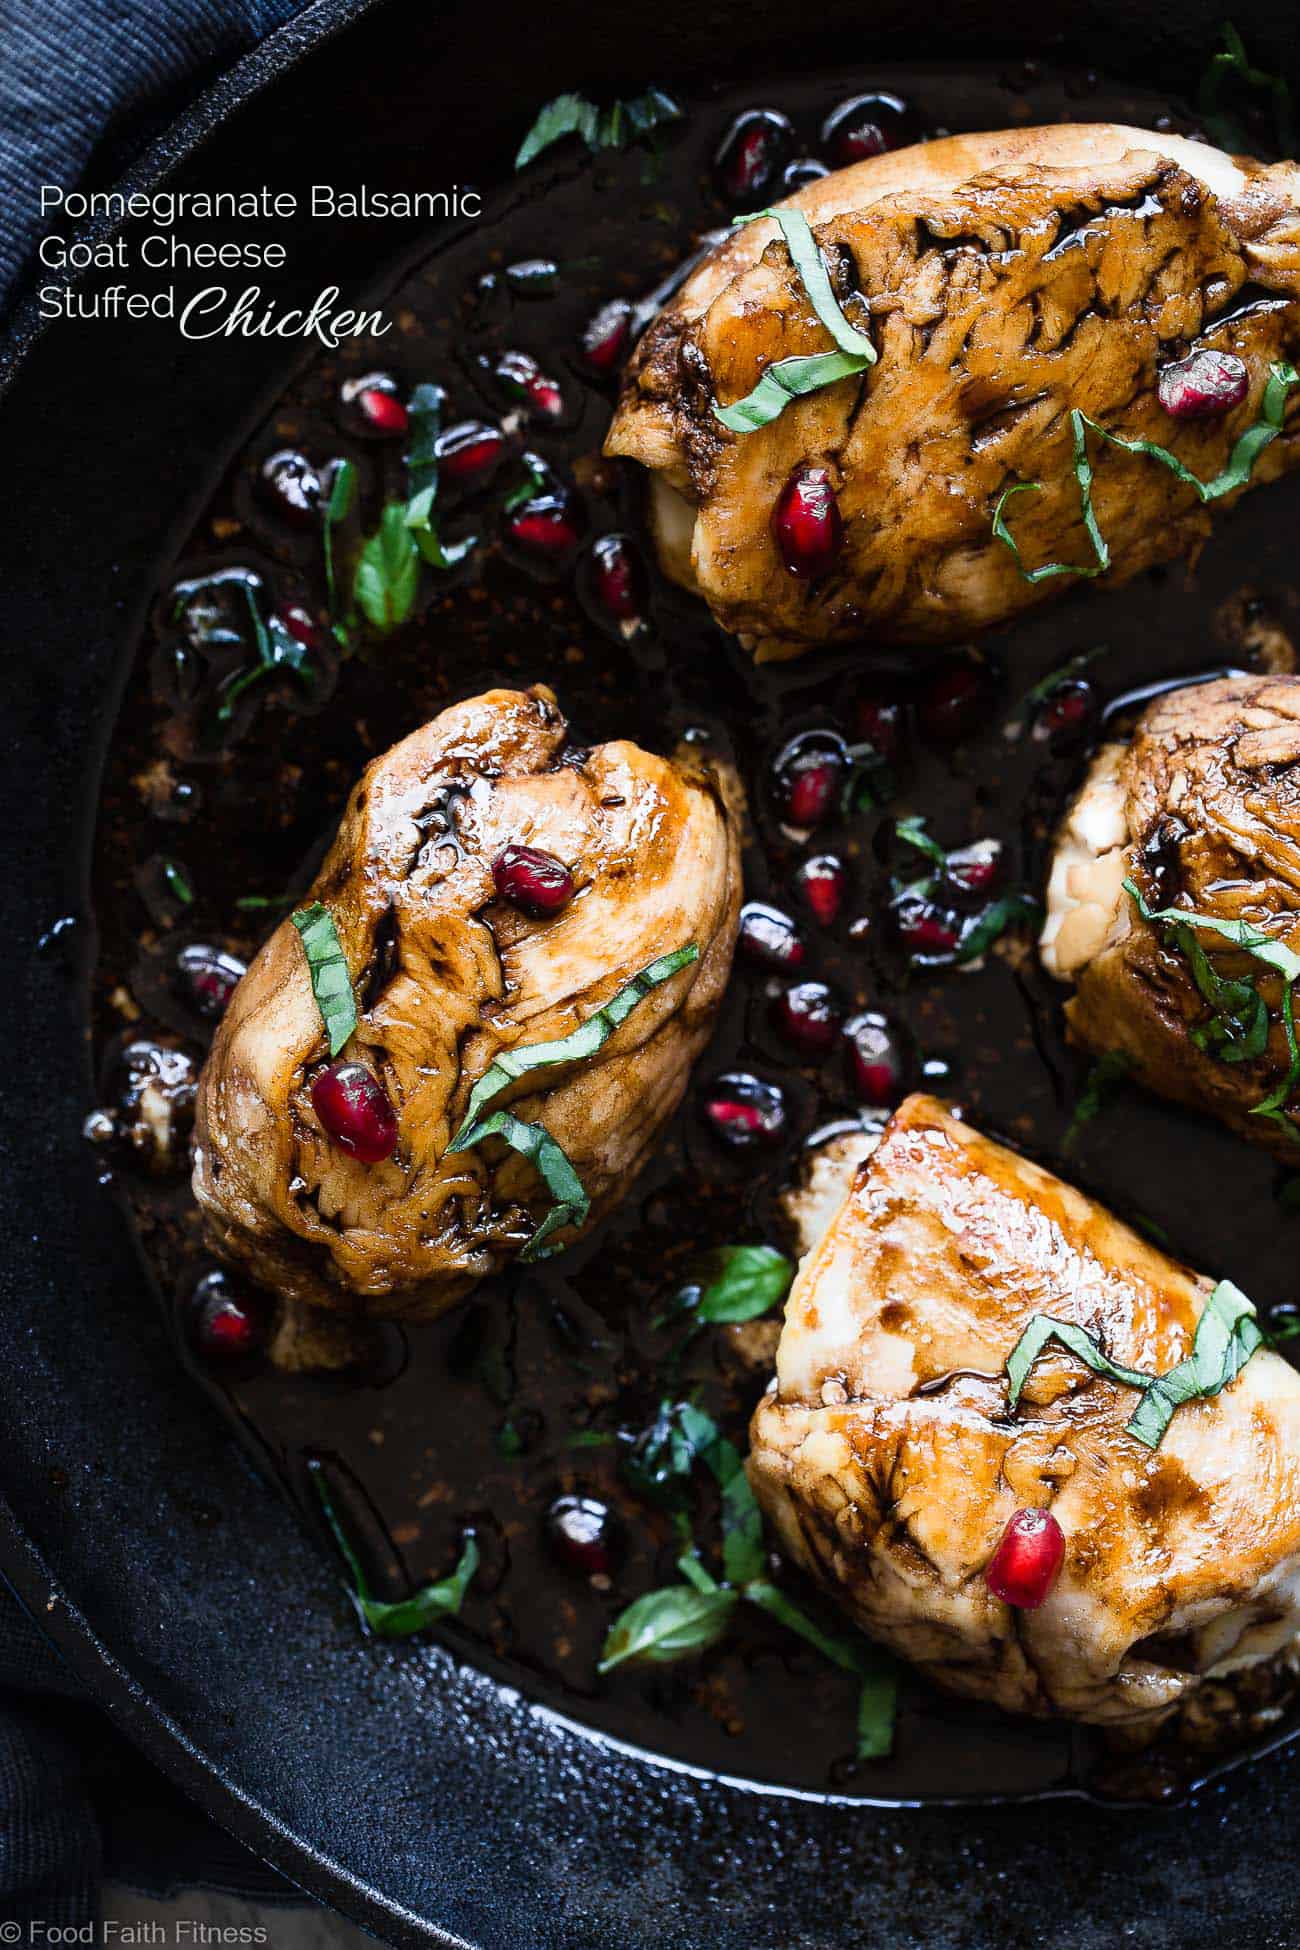 Balsamic Pomegranate Goat Cheese Stuffed Chicken - AÂ  healthy and gluten free dinner, loaded with superfoods! Both picky husbands and kids love this dinner and it feels like a fancy restaurant but is quick and easy enough for weeknights! | Foodfaithfitness.com | @FoodFaithFit